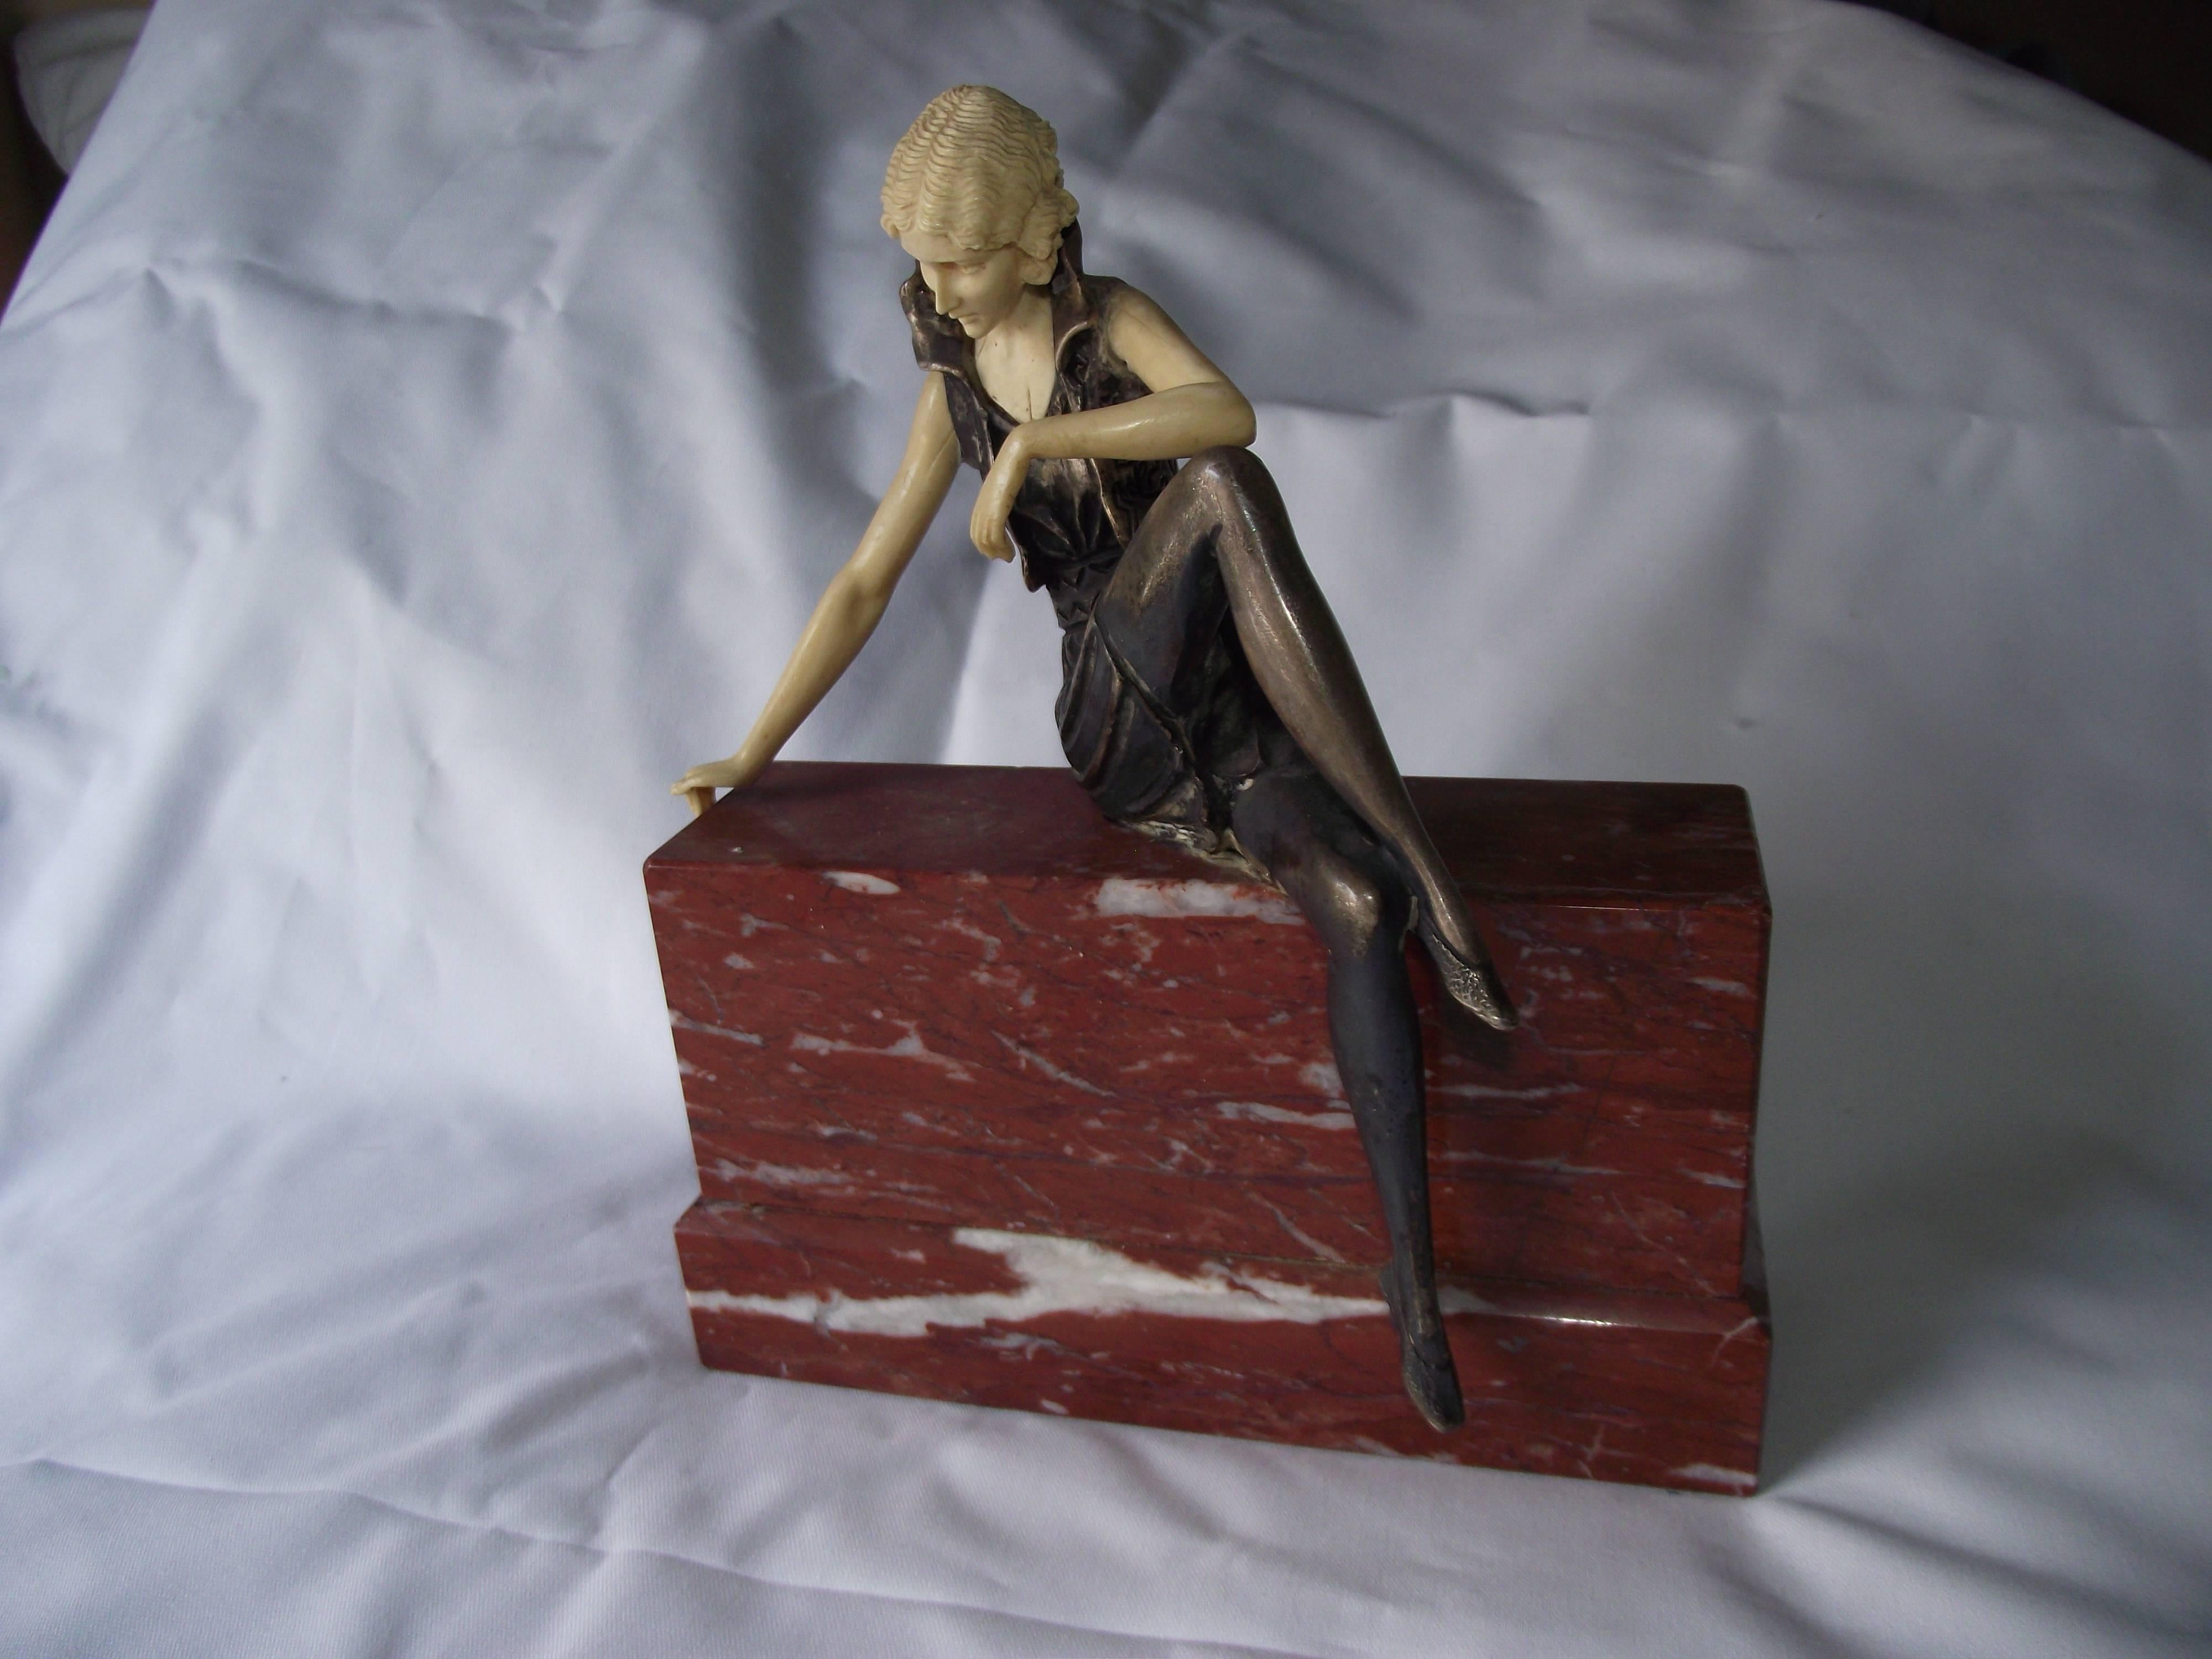 A period replica, this sculpture was made in the same fashion as Ferdinand Preiss. This confident flapper sits cross legged on a wall of sienna marble.

Like Preiss it is cold painted bronze the flesh colored pieces are delicately carved to fit